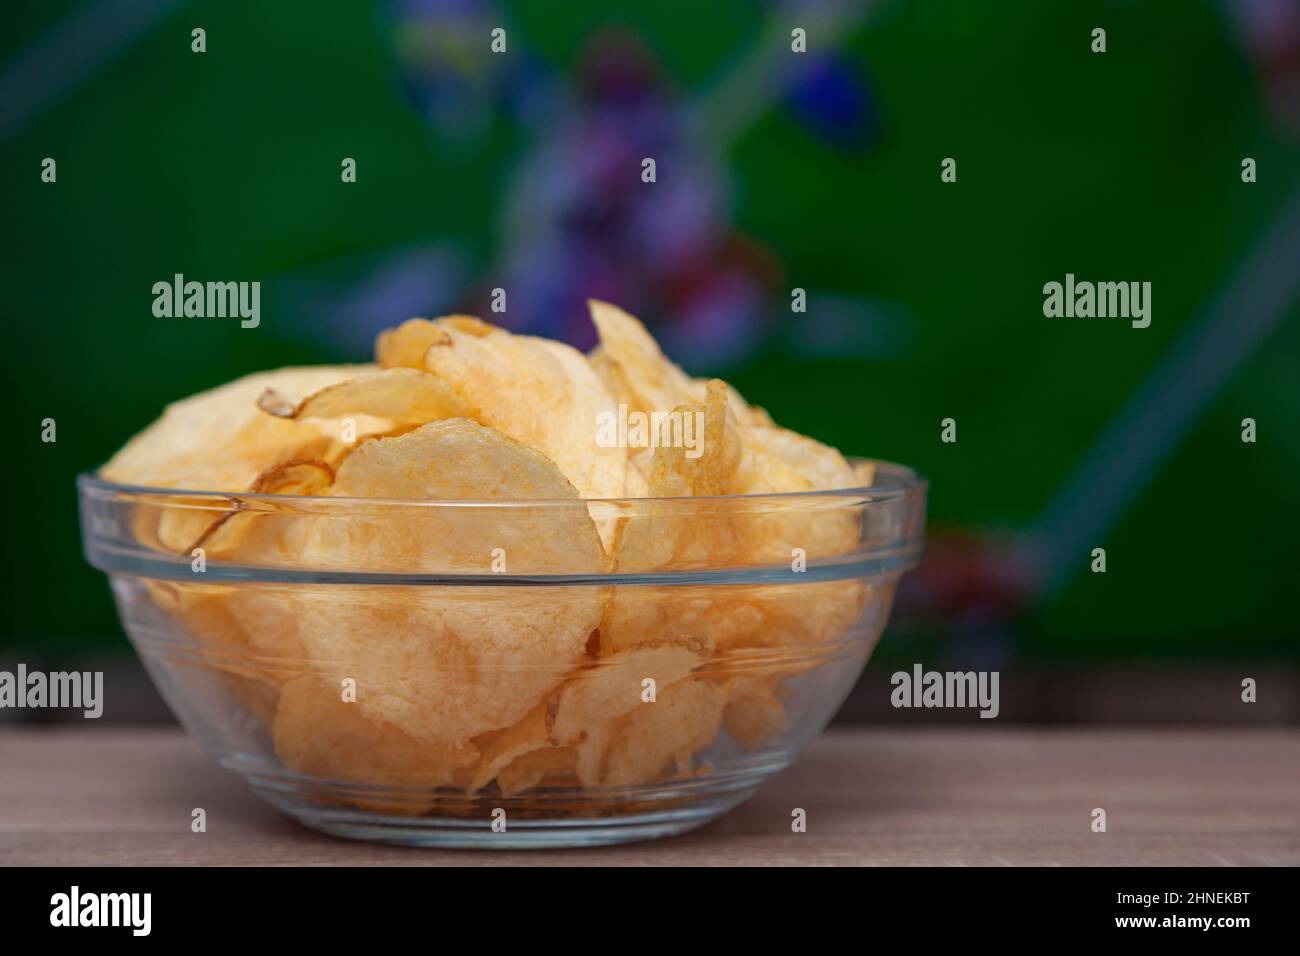 A clear glass bowl filled with chips on a wooden table. In the background, out of focus, is a television with a sports broadcast. Stock Photo